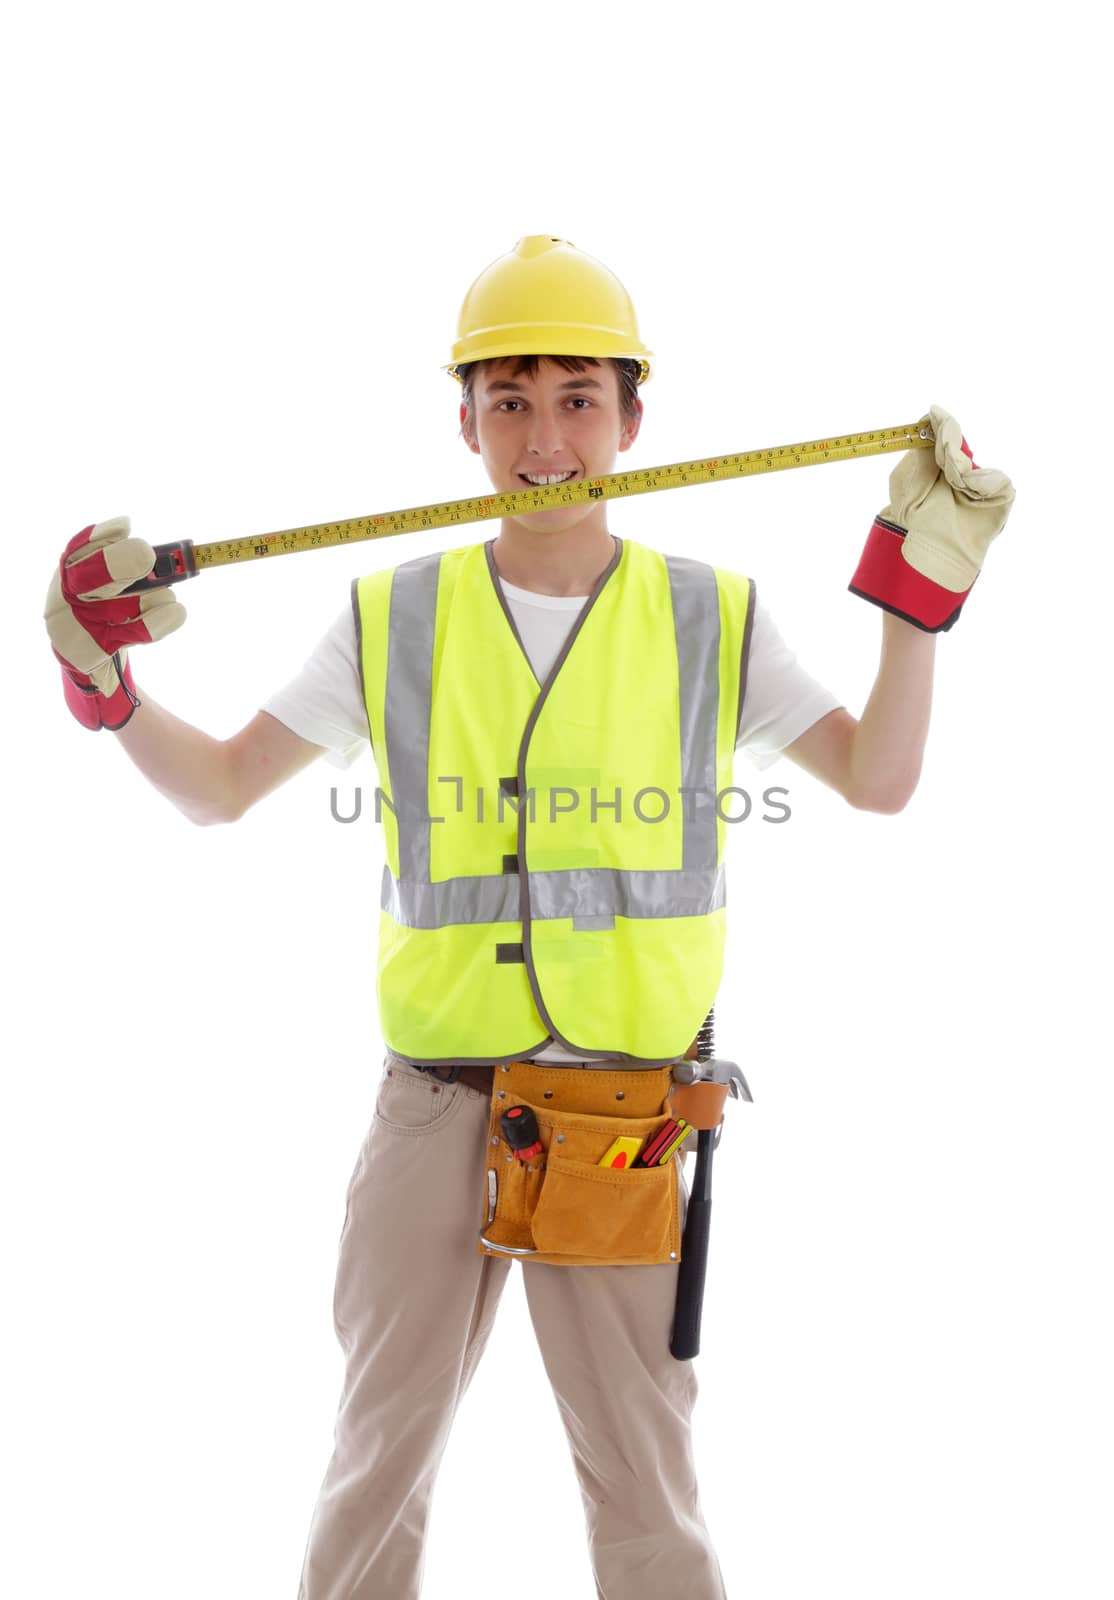 Apprentice or student carpenter or builder smiling, with tools and measuring tape.  White background.